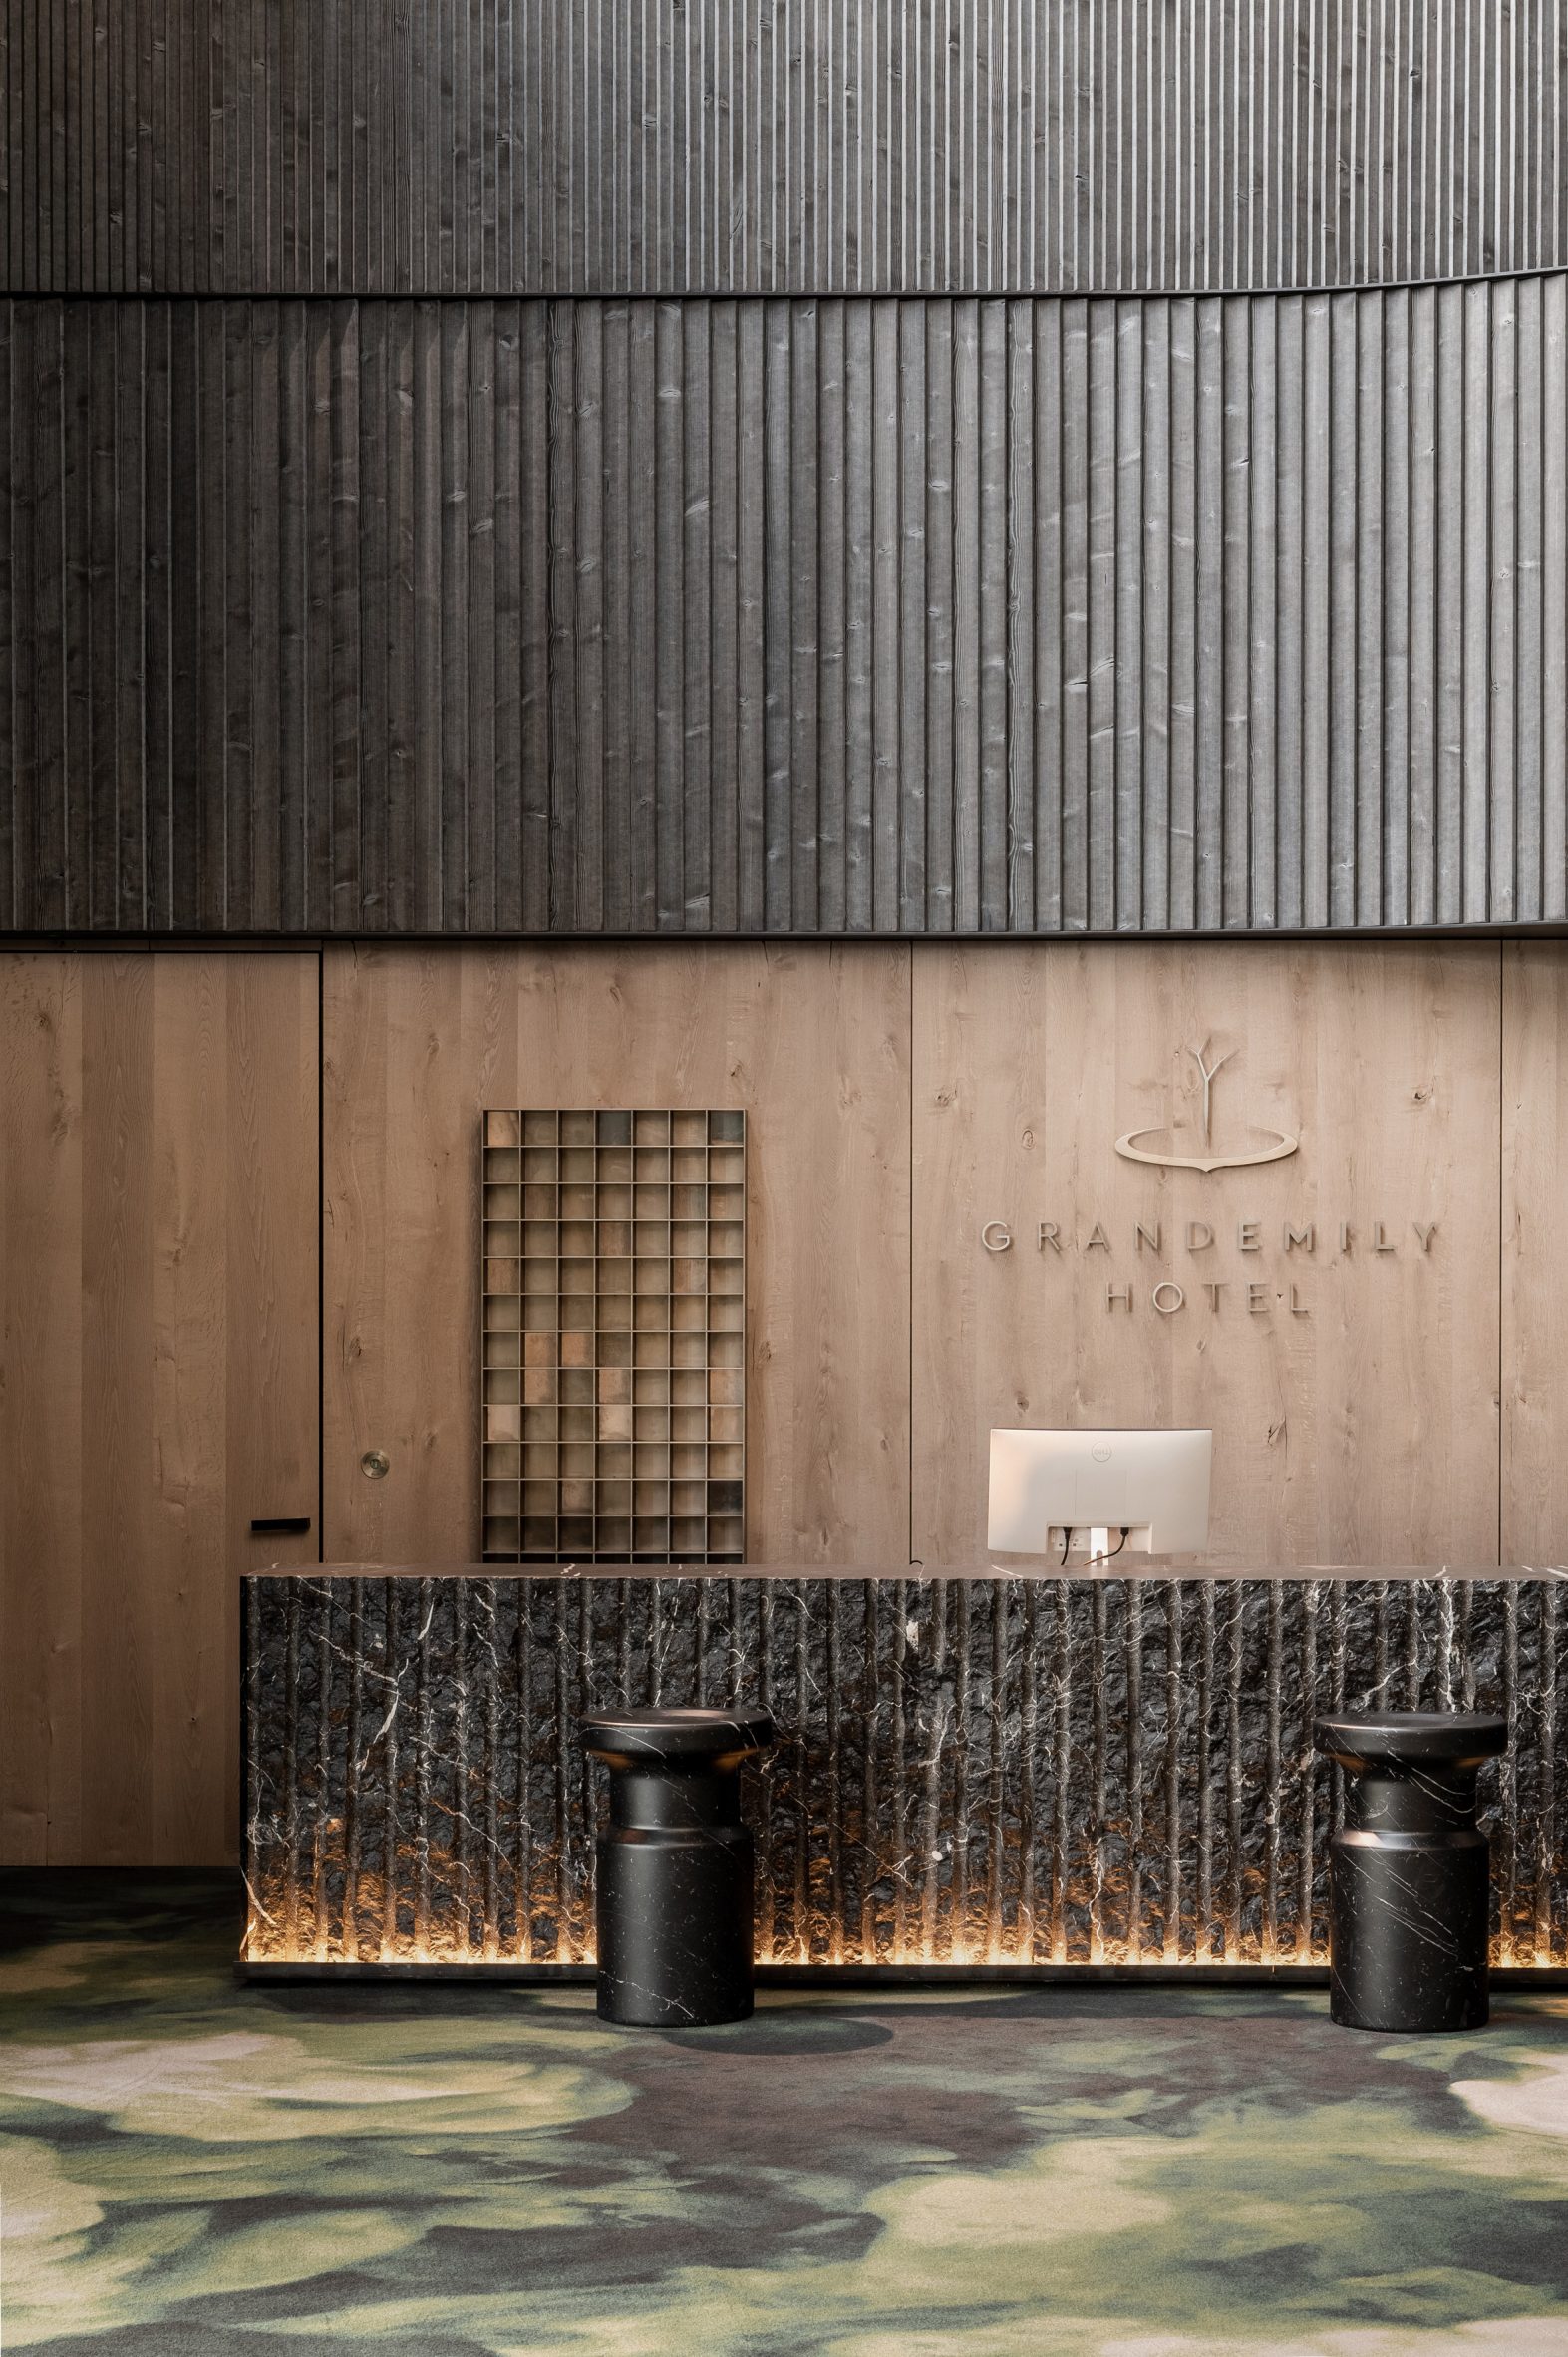 Thermory wood cladding above welcome desk